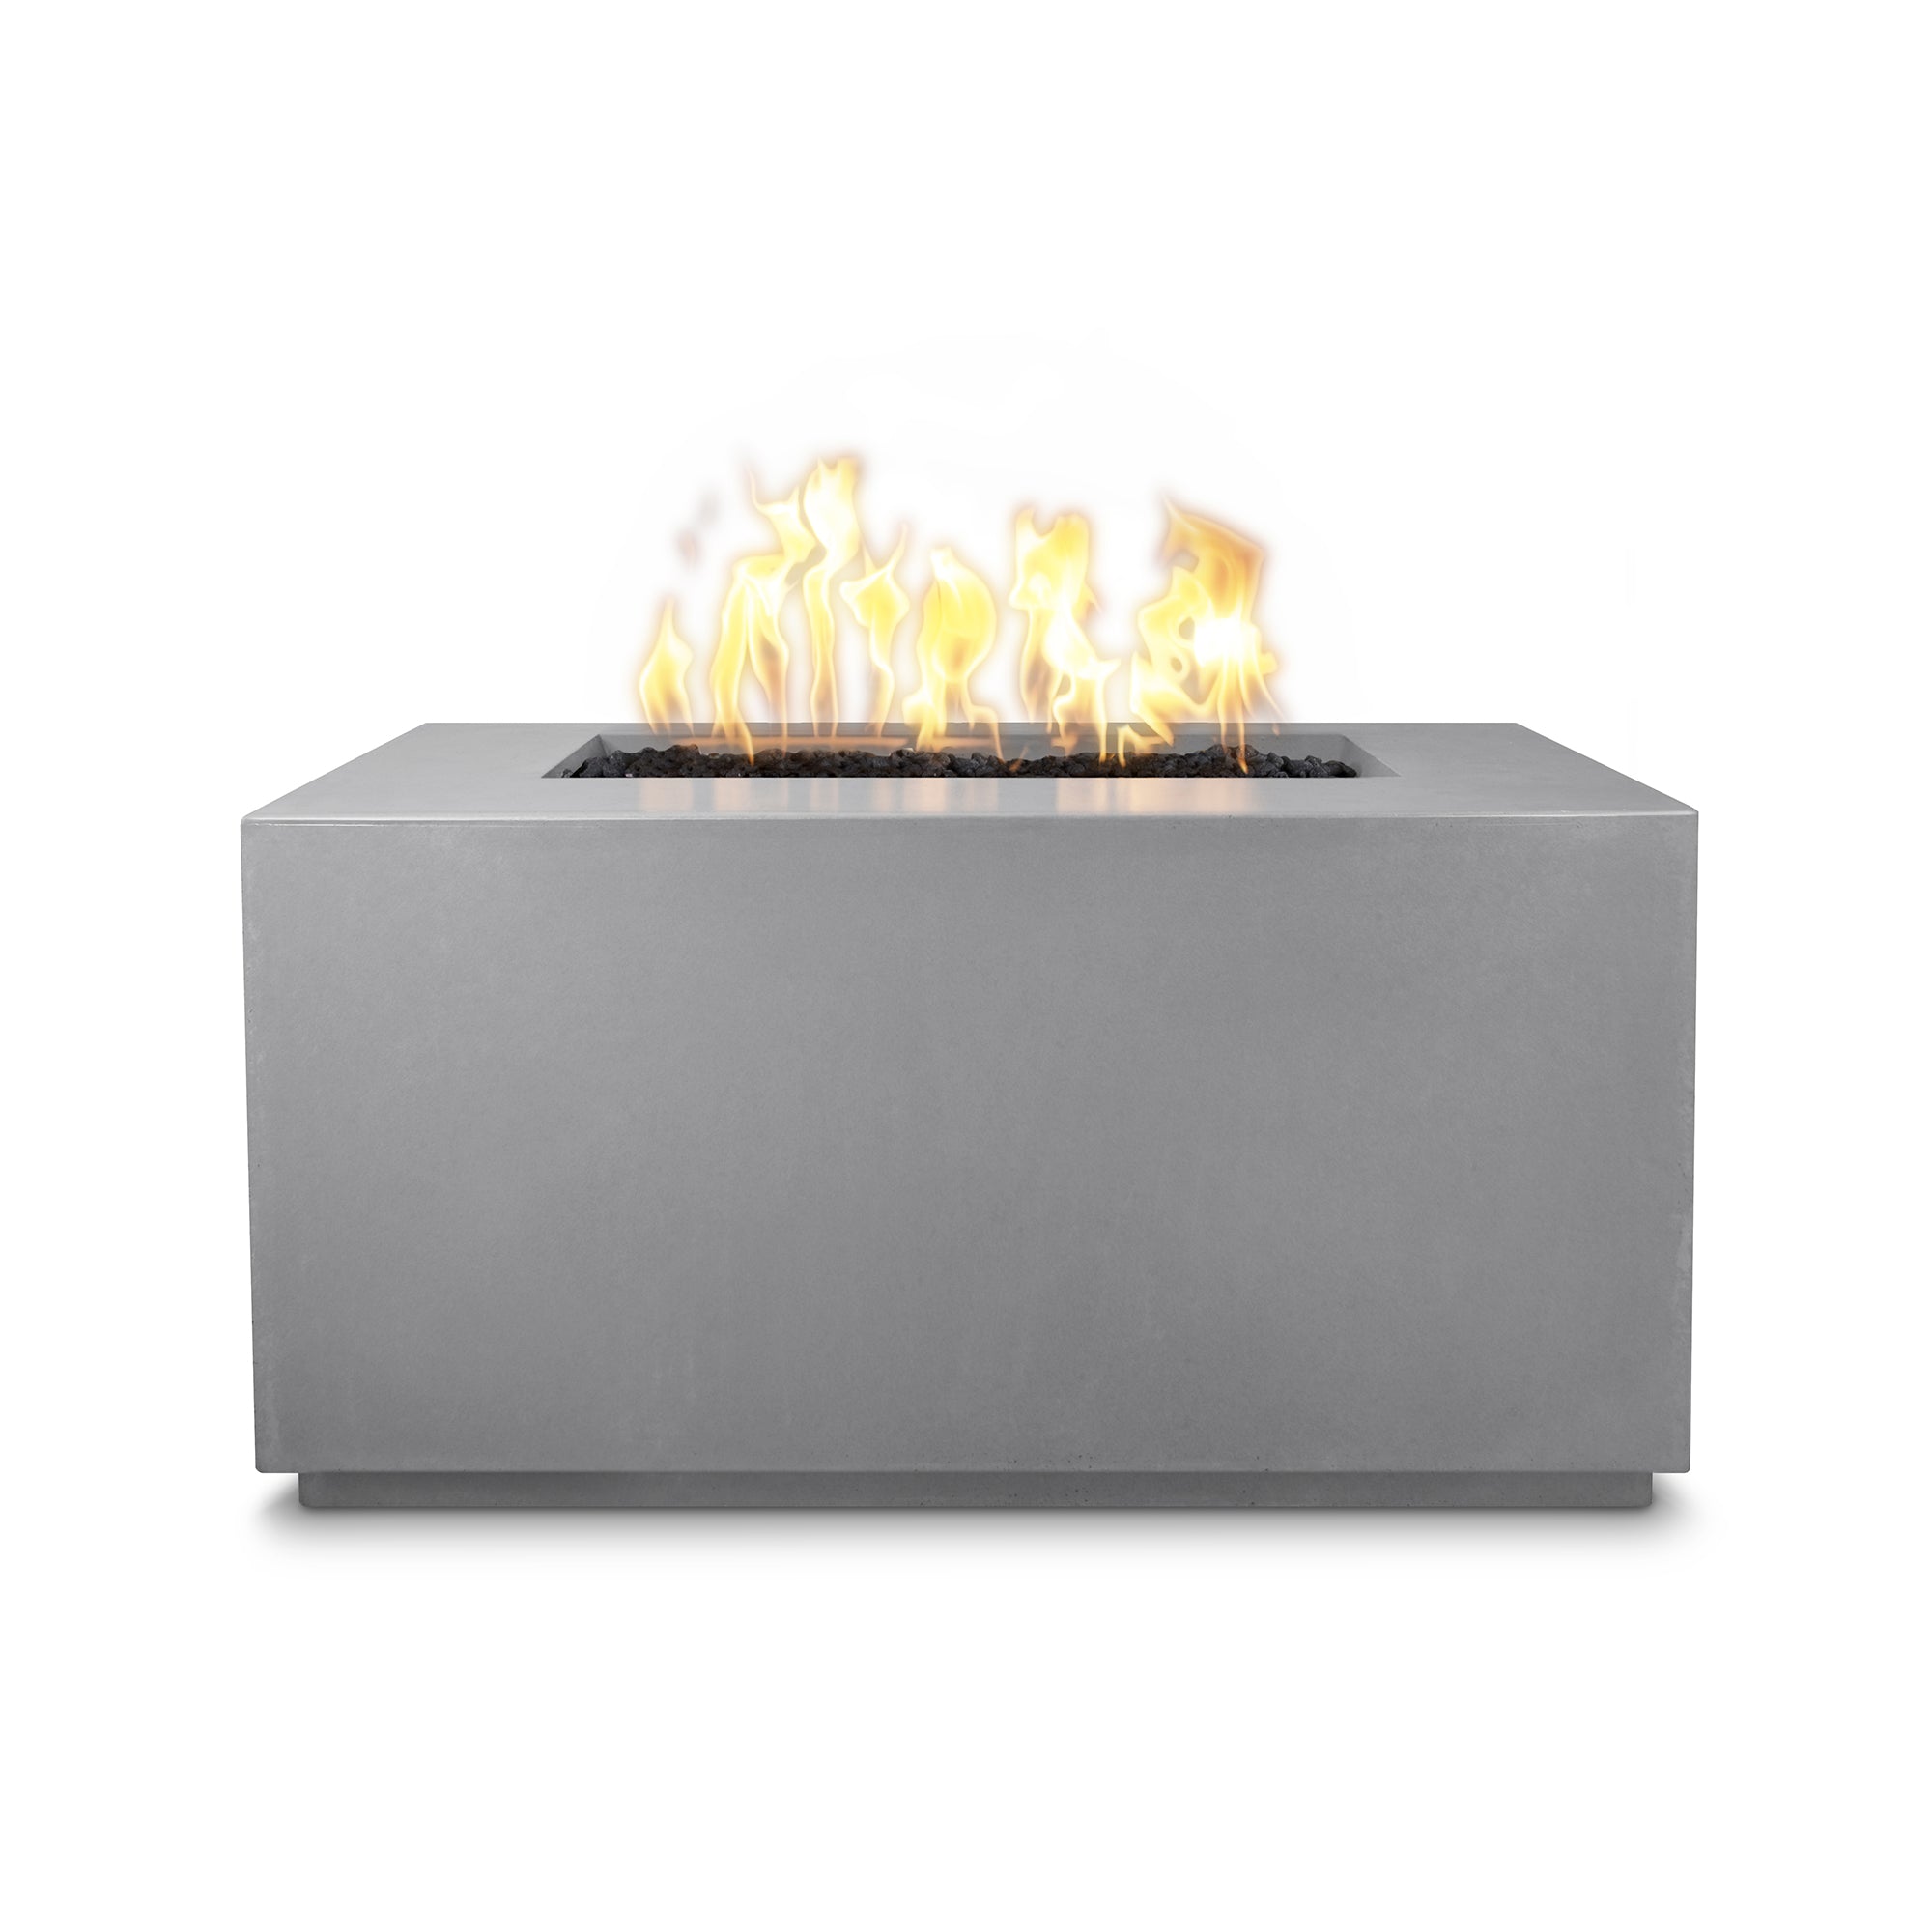 The Outdoor Plus - Pismo 48 Inch Concrete Match Lit Fire Pit - OPT-2448